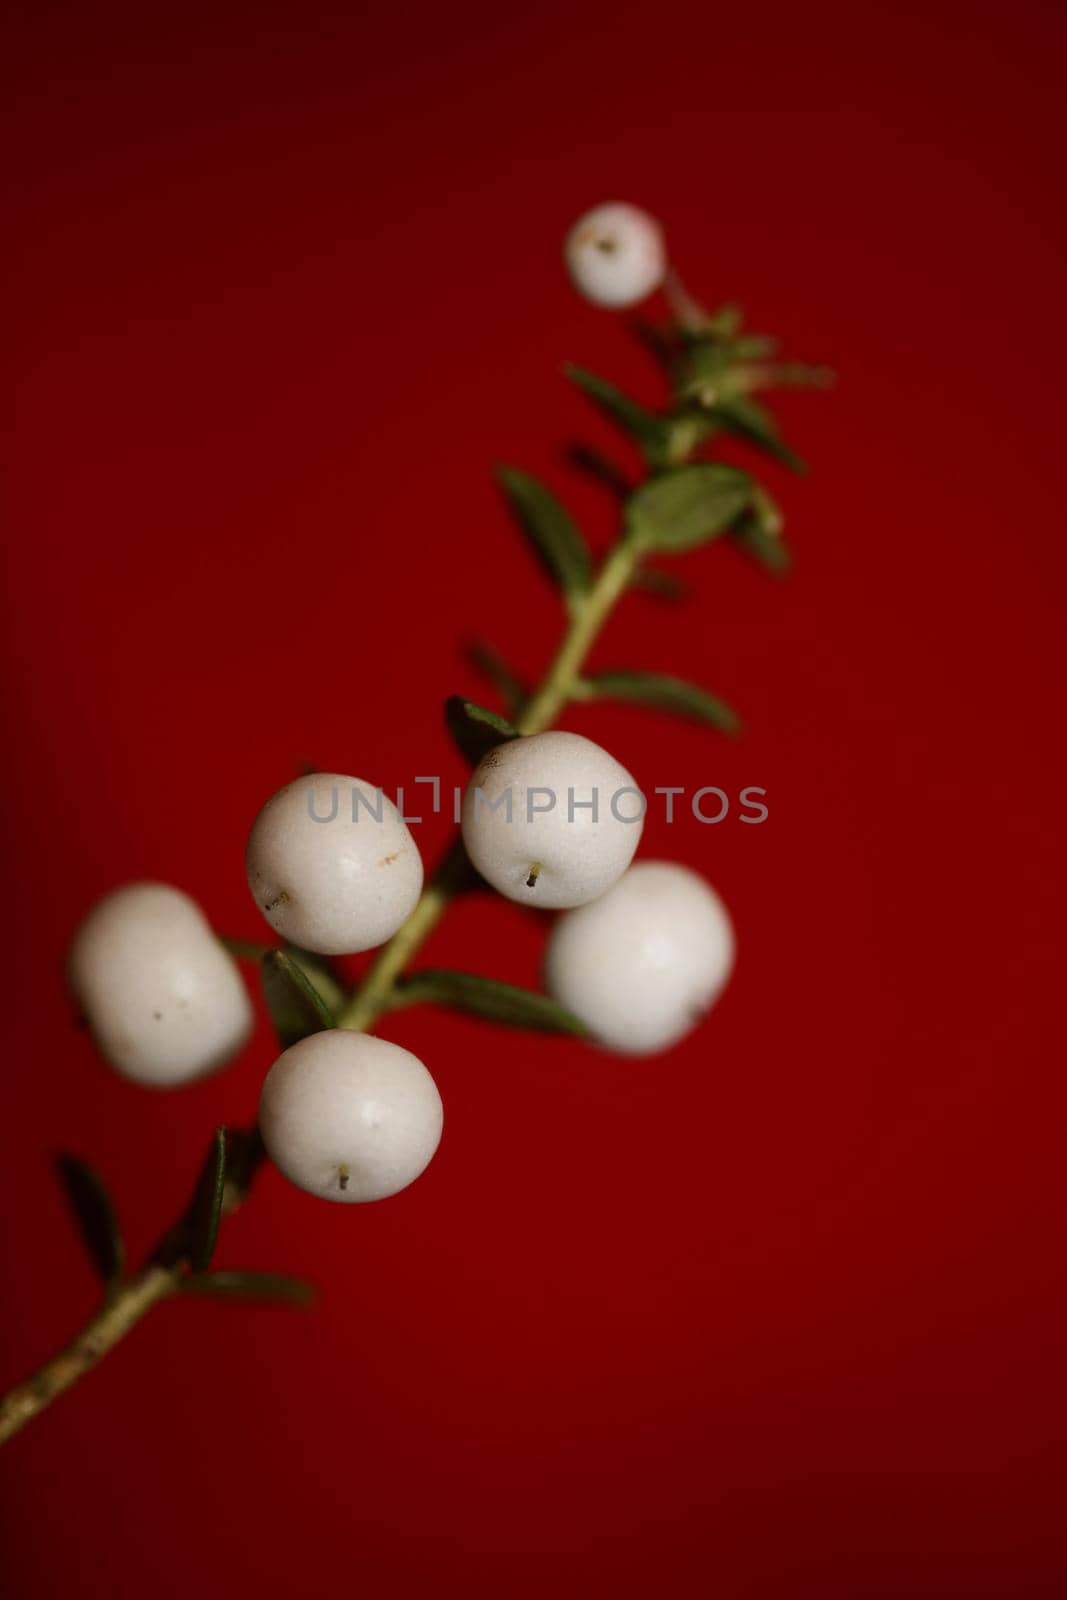 White round Gaultheria fruits close up botanical background family ericaceae high quality big size prints home decor shop wall posters